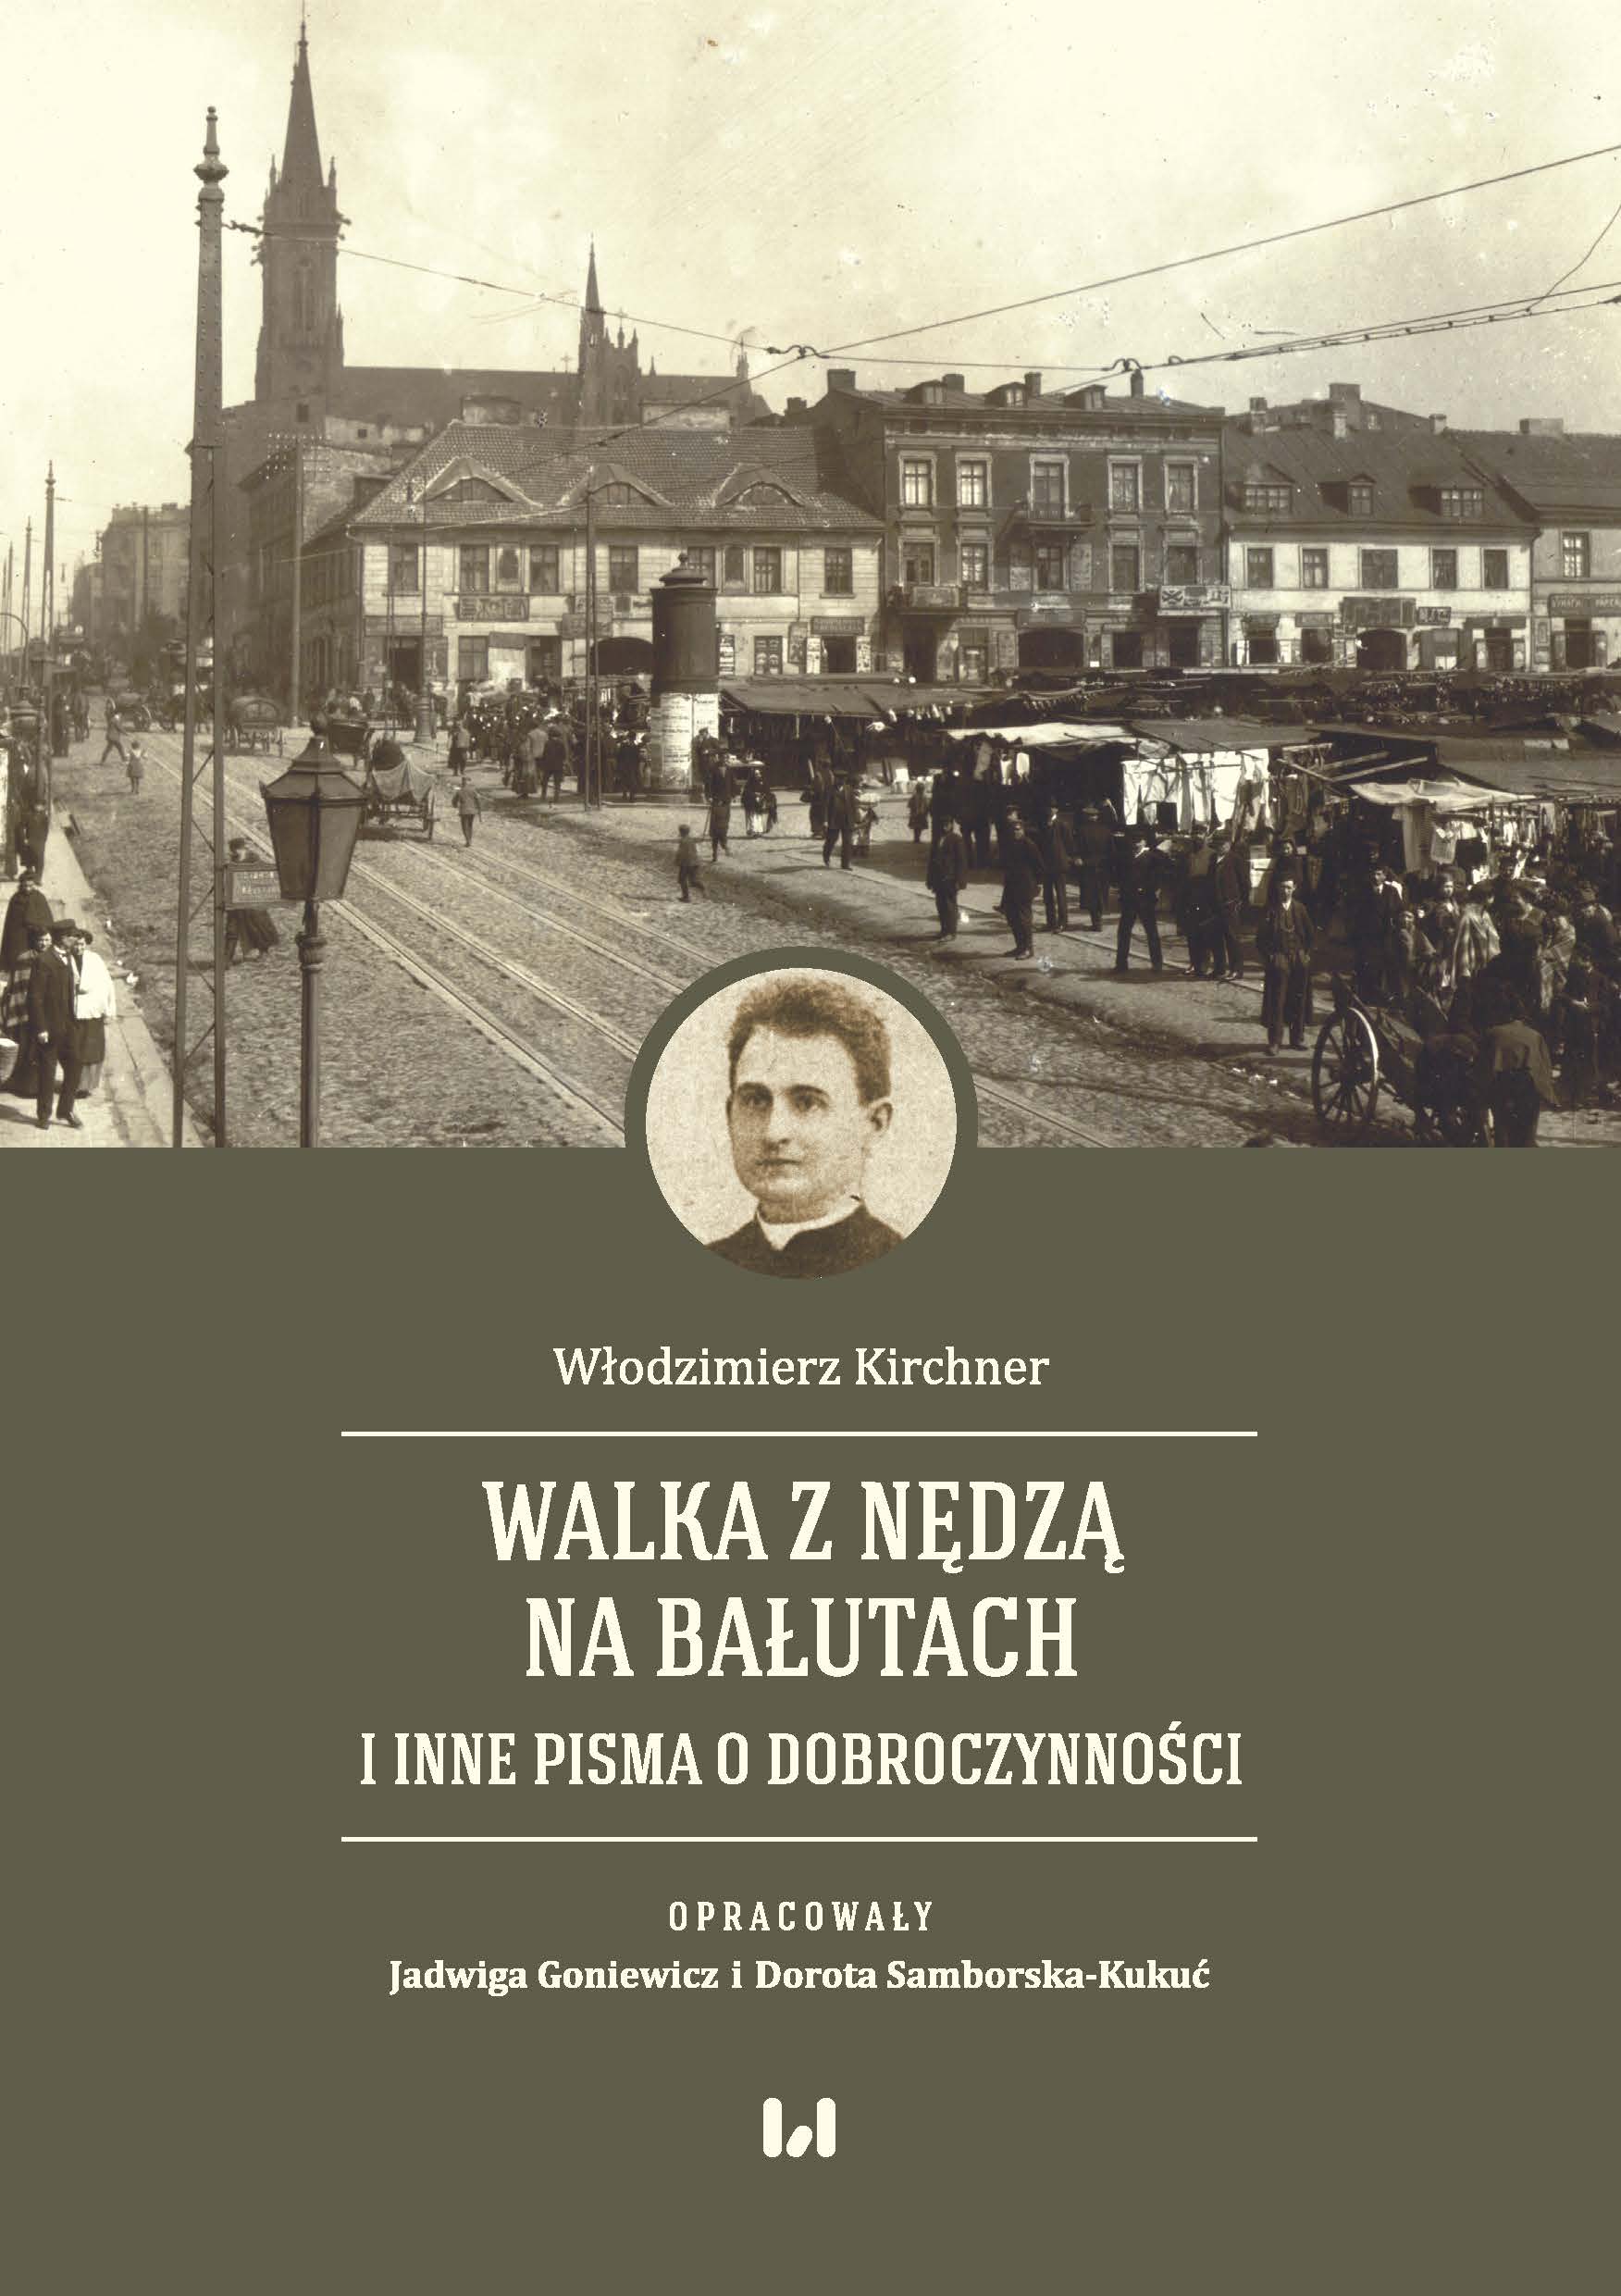 The fight against poverty in Bałuty and other writings about charity